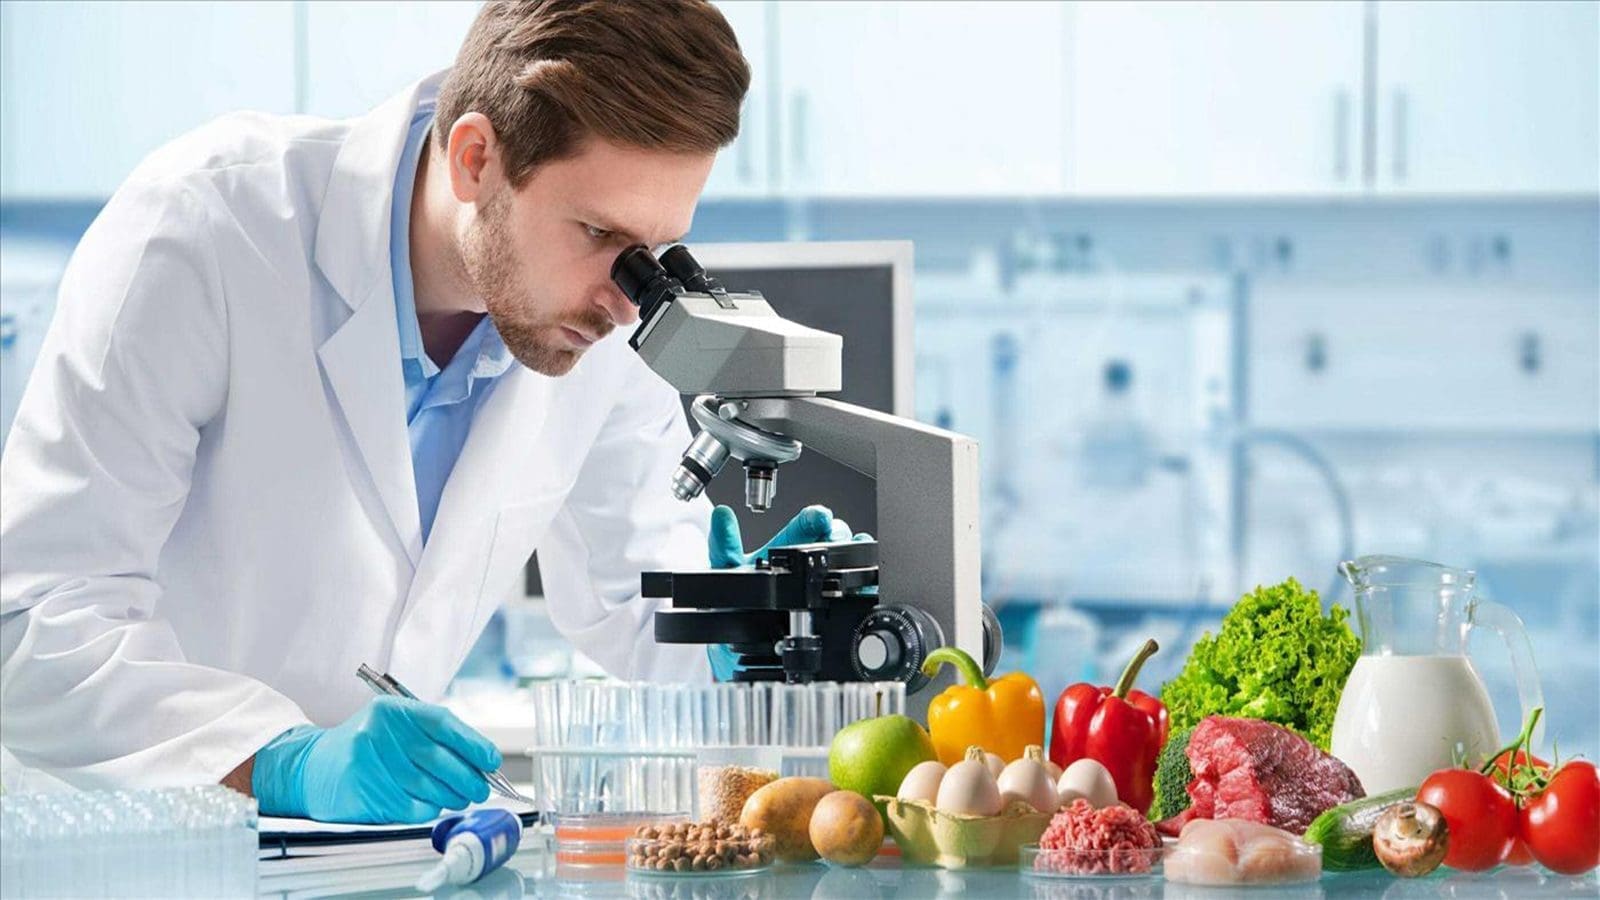 Food Testing Kits Market Forecast 2022-2028 shows growth of market